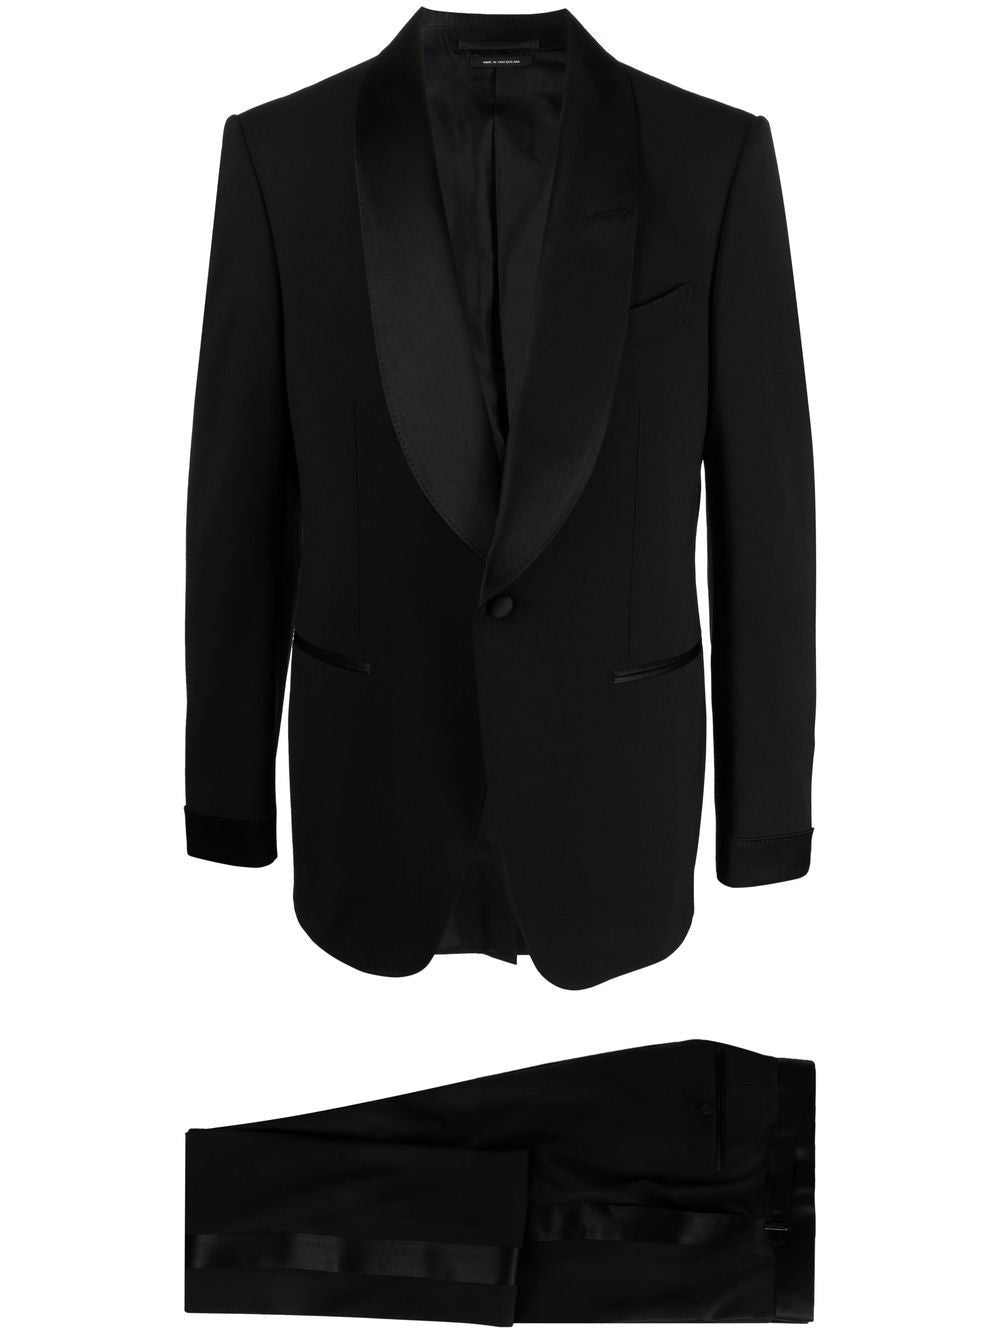 TOM FORD Tailored Single Breasted Suit for Men